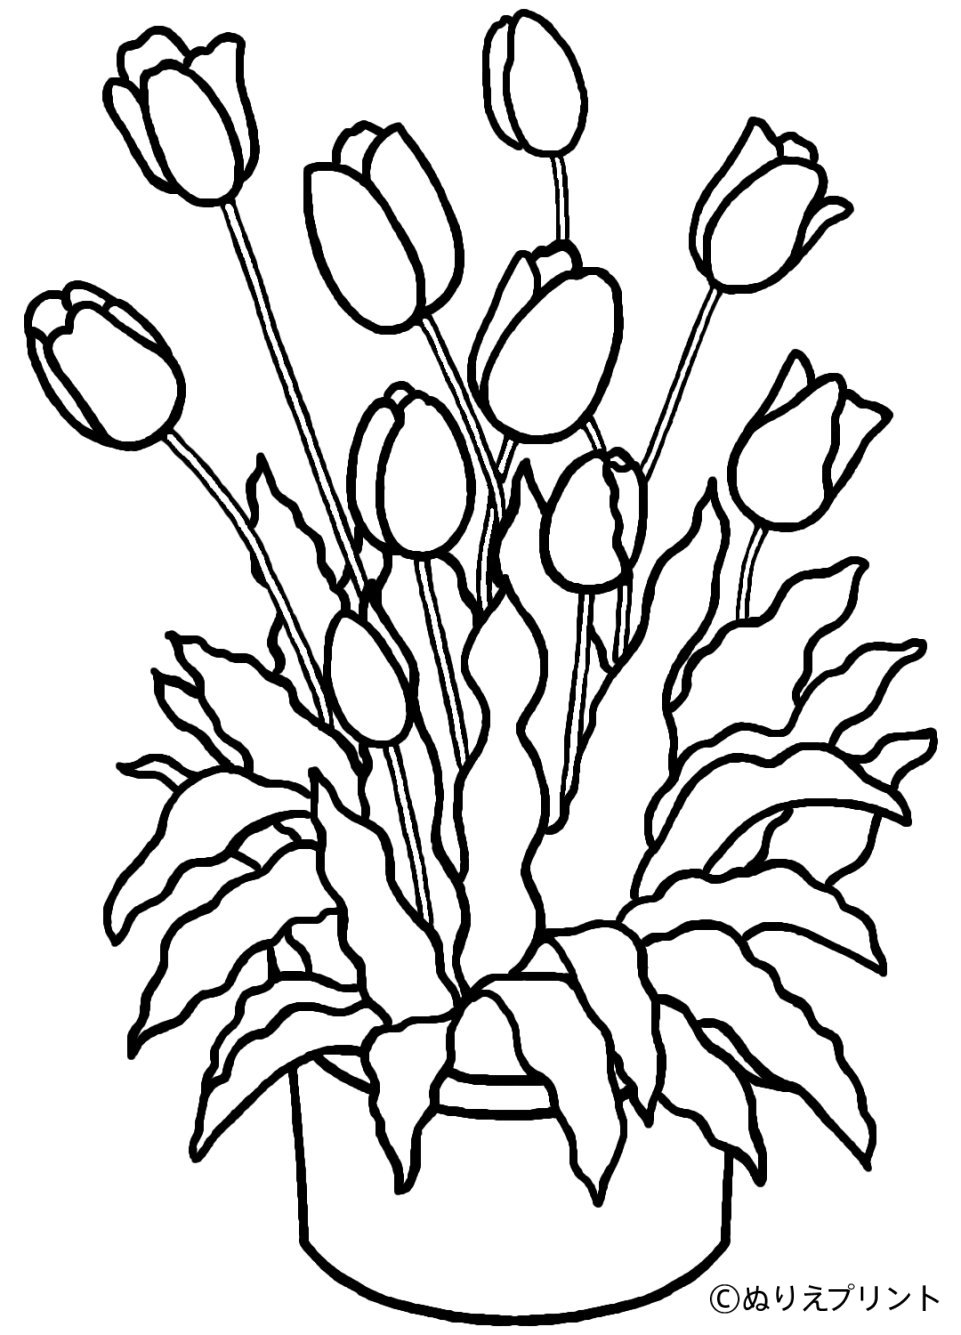 Tulip Coloring Pages For Adults Coloring Pages